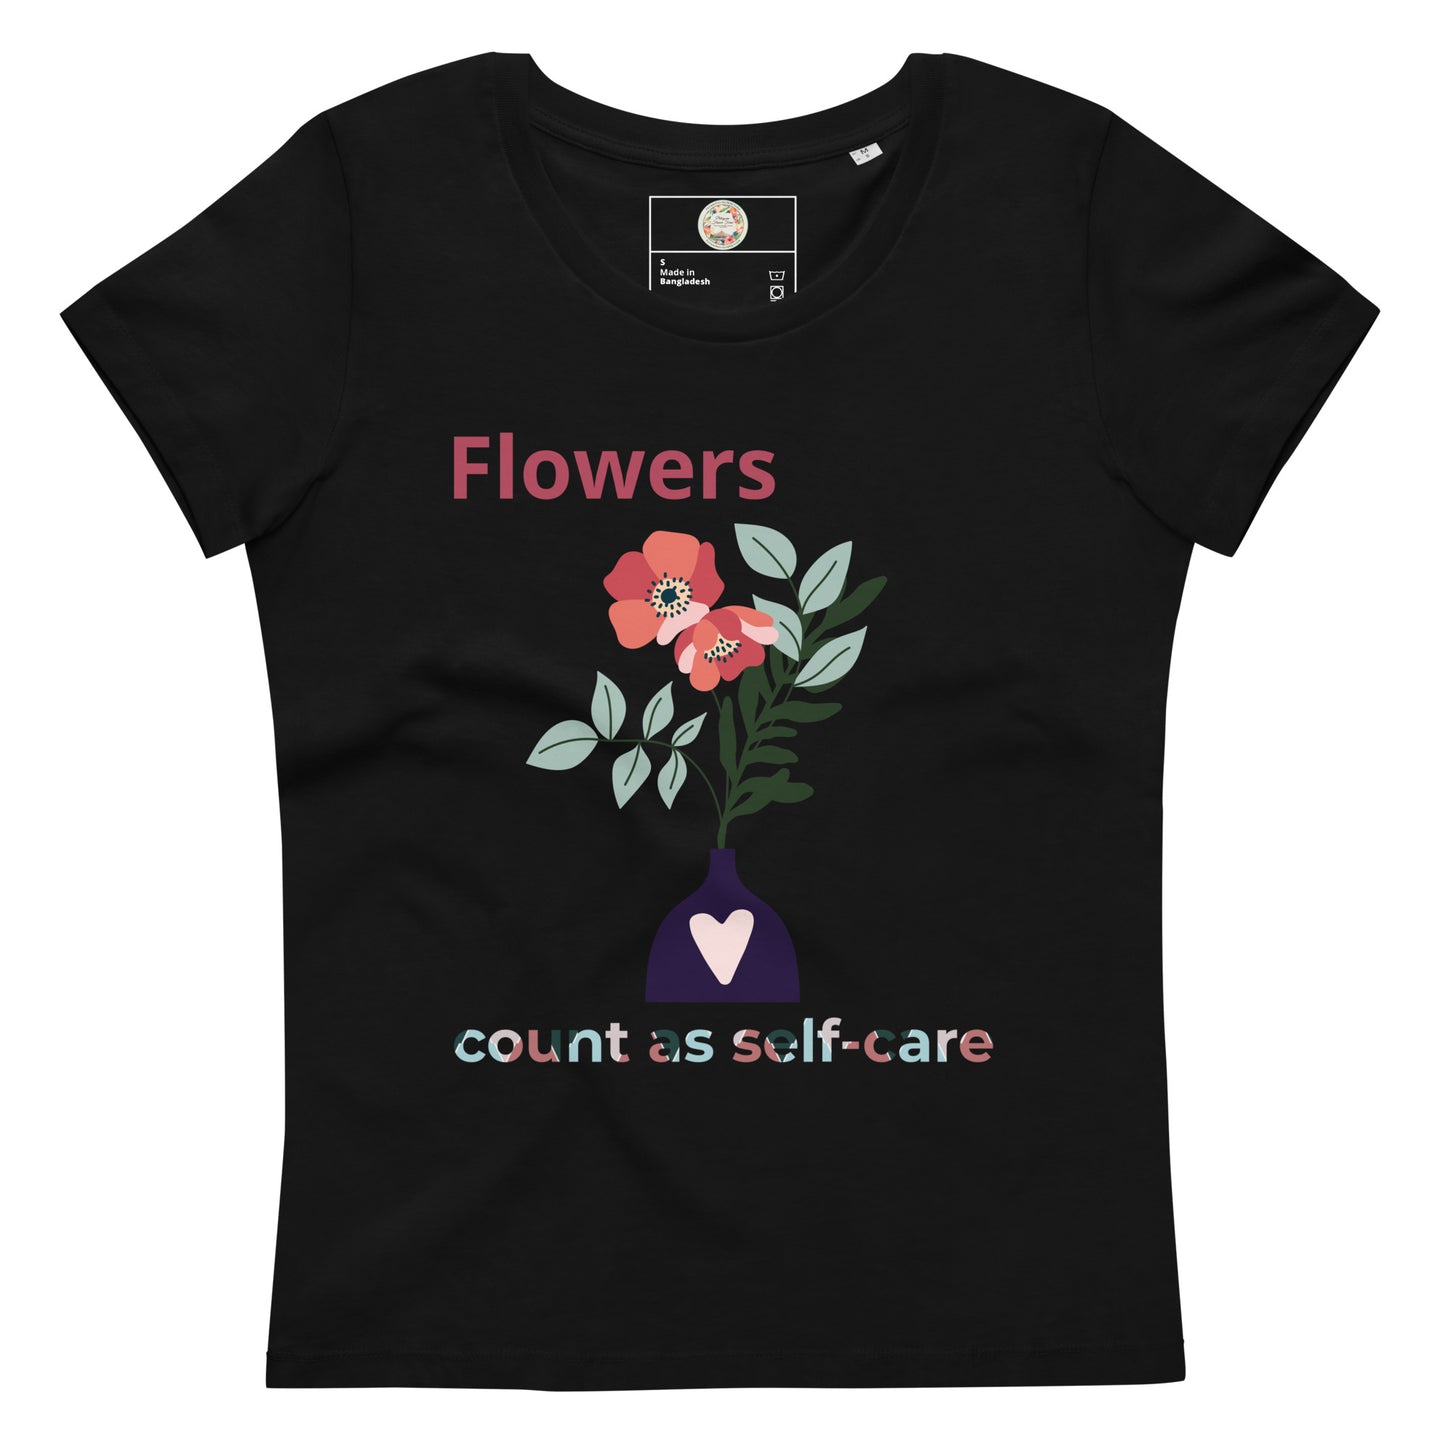 "Sweet Floral Tee's" Floral Self Care - Women's fitted eco tee